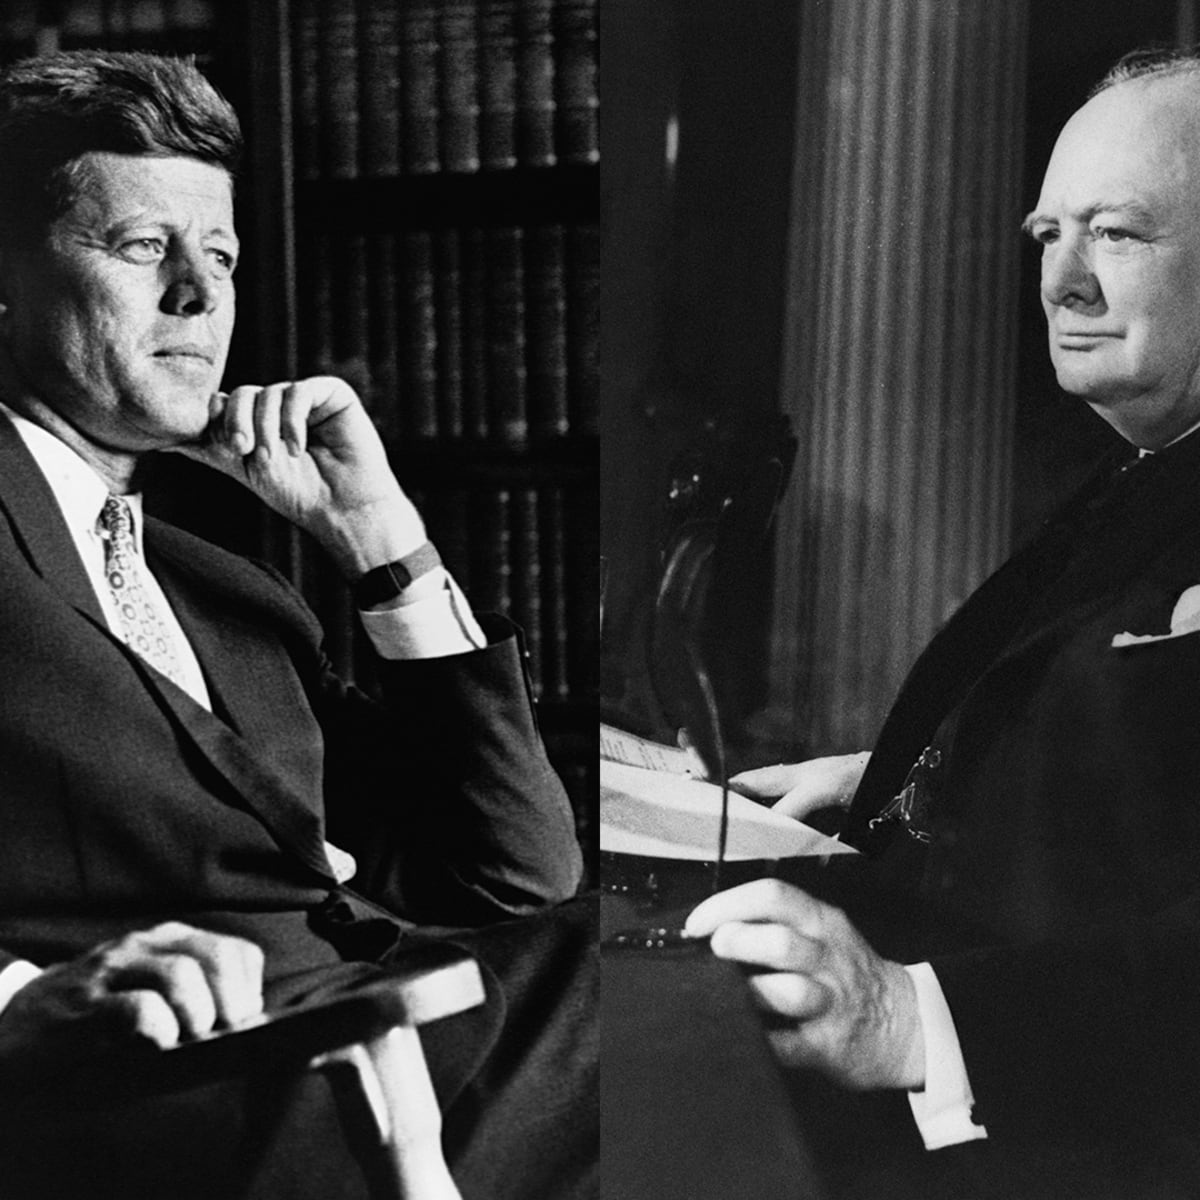 Total number of Tweets with Churchill = 35 #Remember35 Despite JFK's father feuding with the Prime Minister during World War II, the late president idolized and took cues from the British politician. https://www.biography.com/.amp/news/john-f-kennedy-winston-churchill